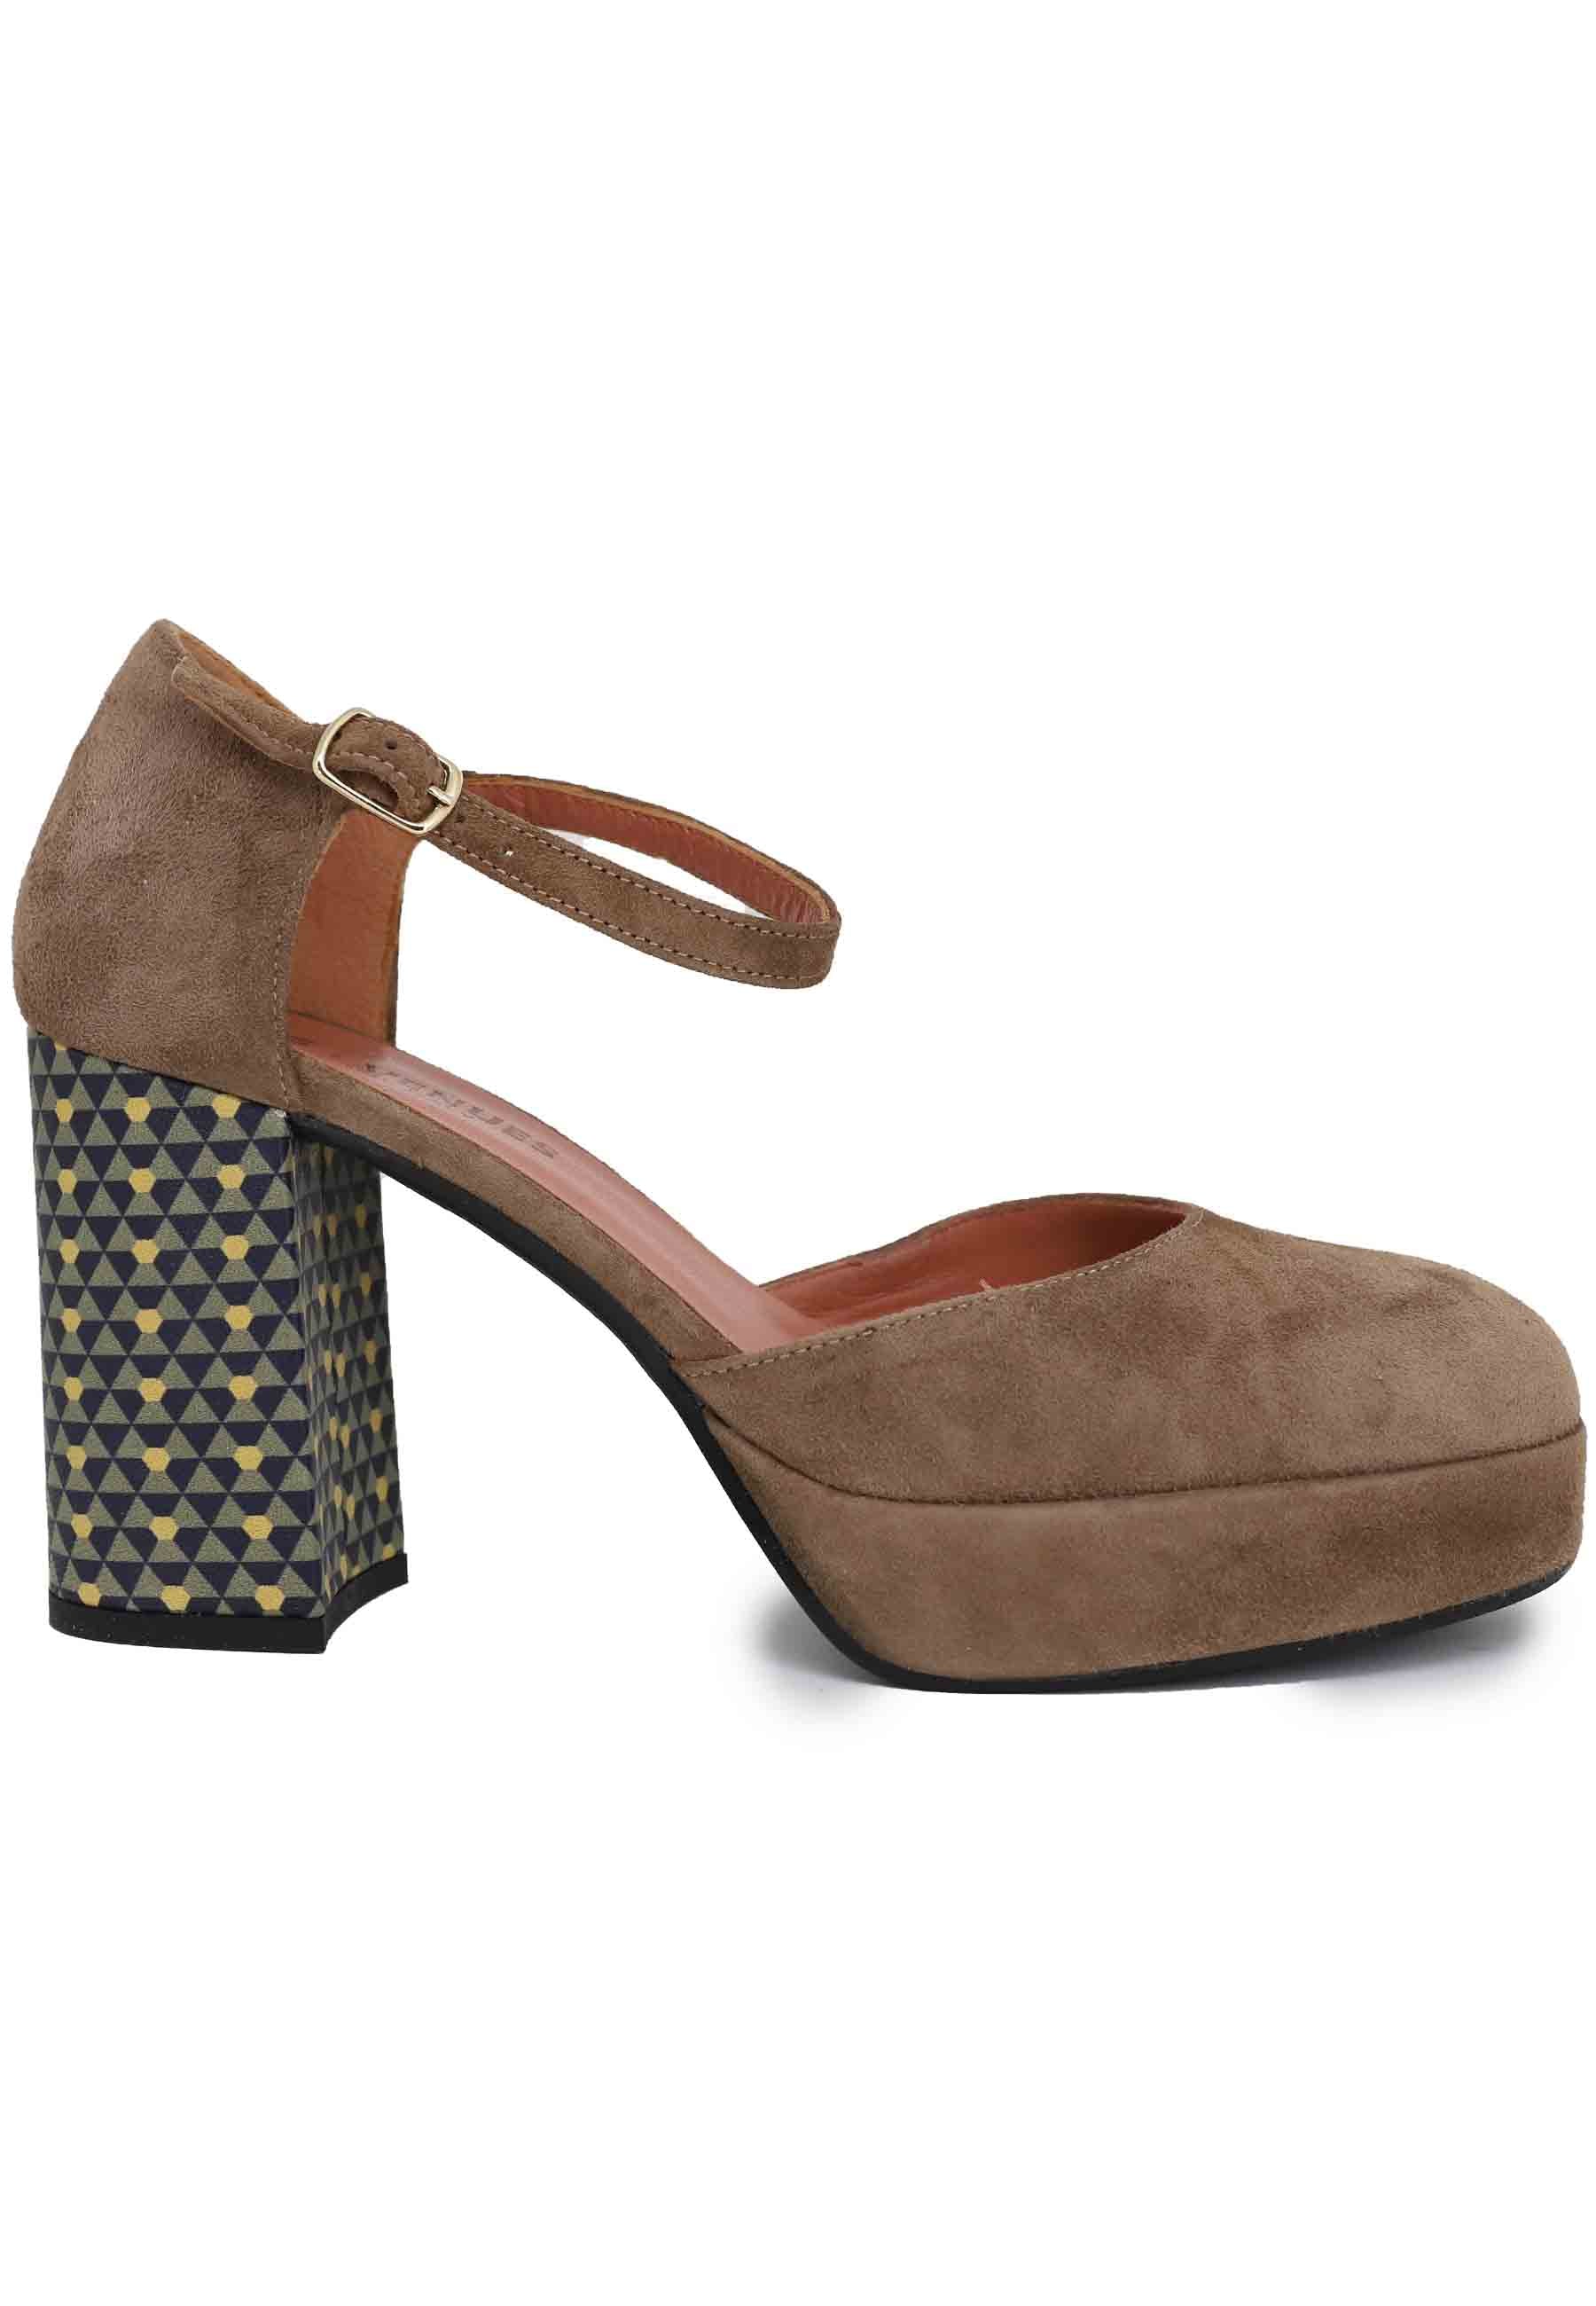 Women's decollete in taupe suede with ankle strap